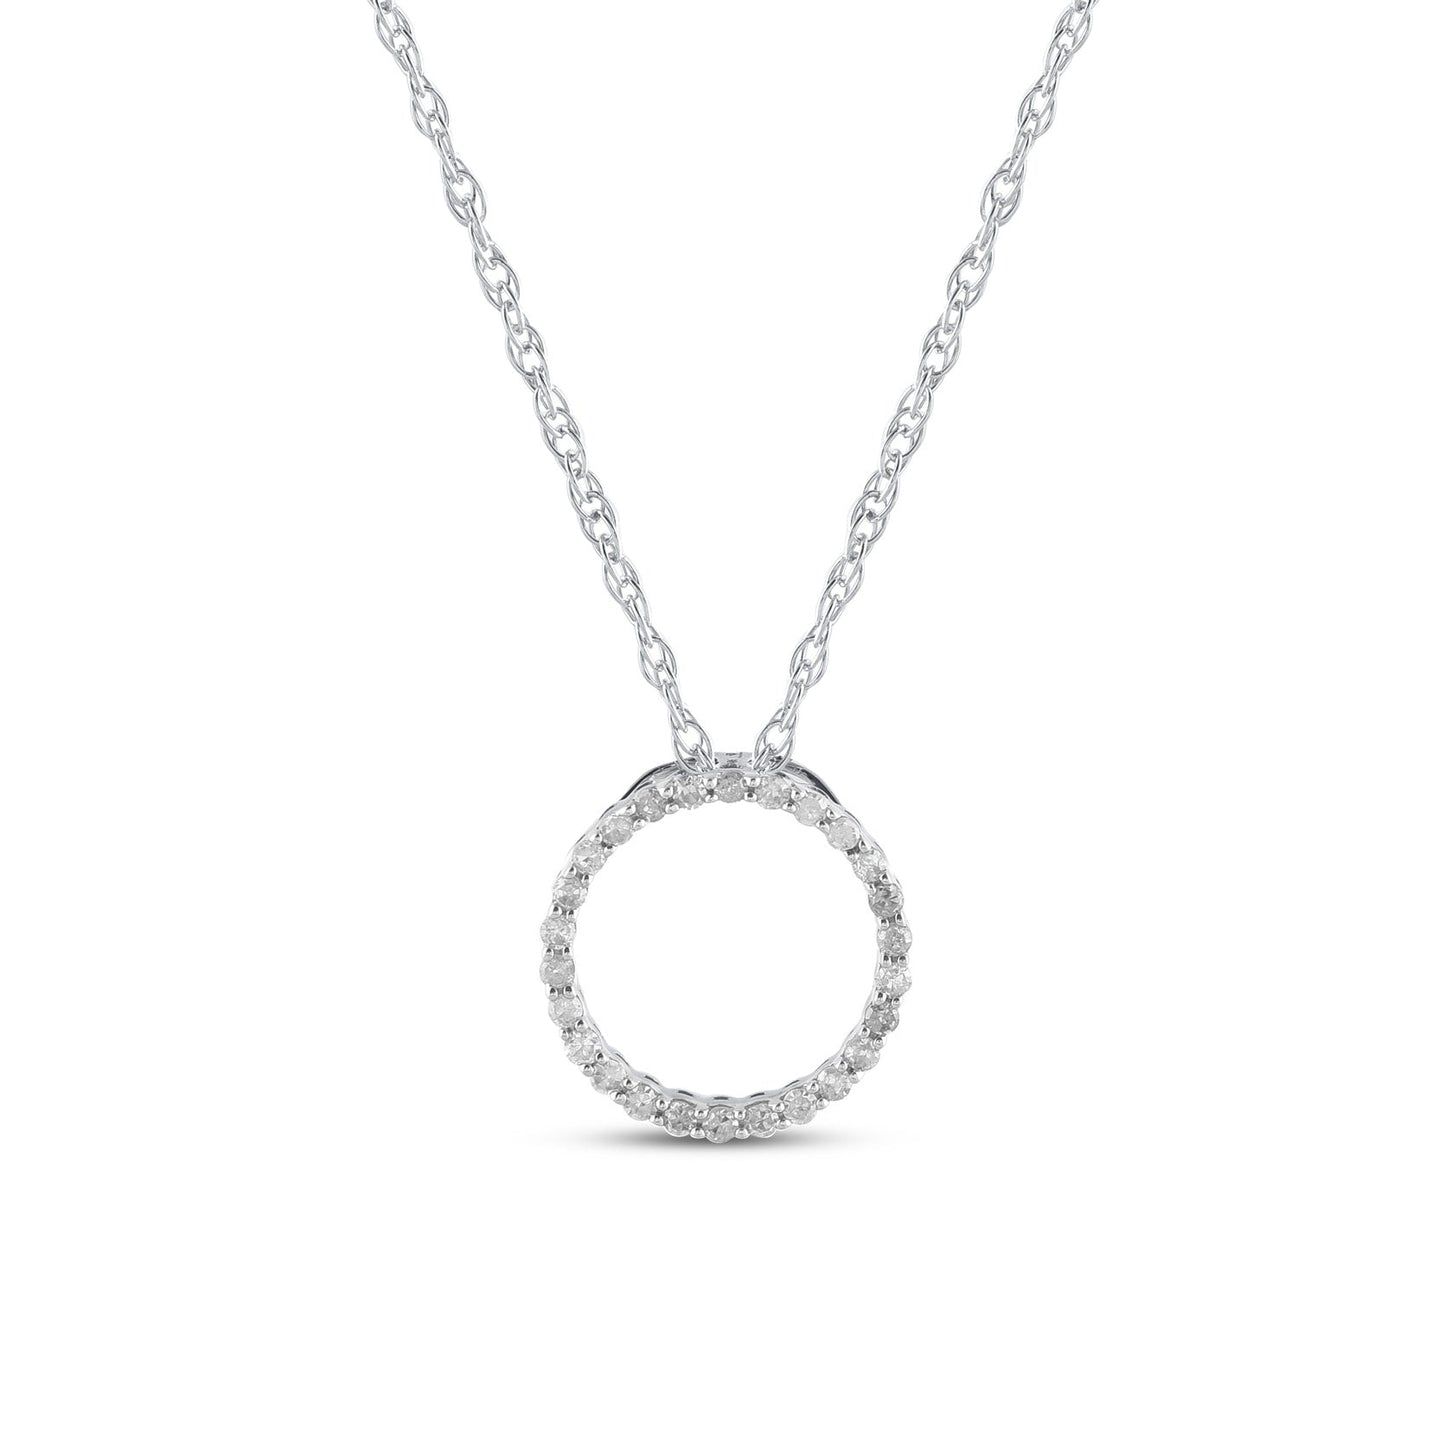 1 Carat Natural Round Diamonds Circle Pendant Necklace in 10k Solid Gold